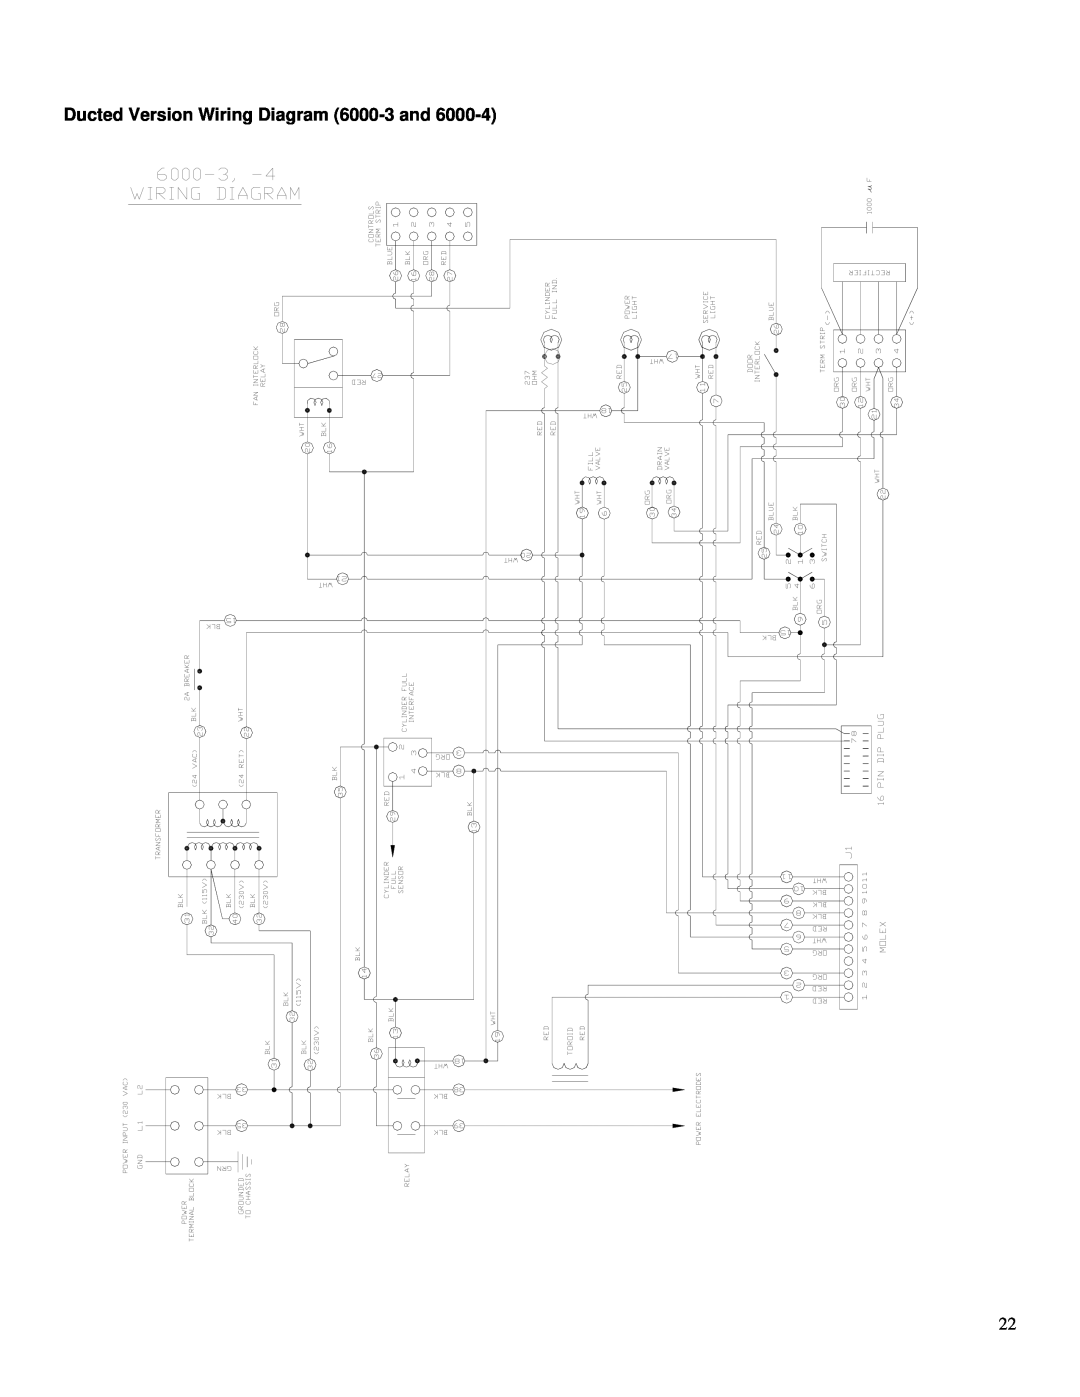 Herrmidifier Co owner manual Ducted Version Wiring Diagram 6000-3and 